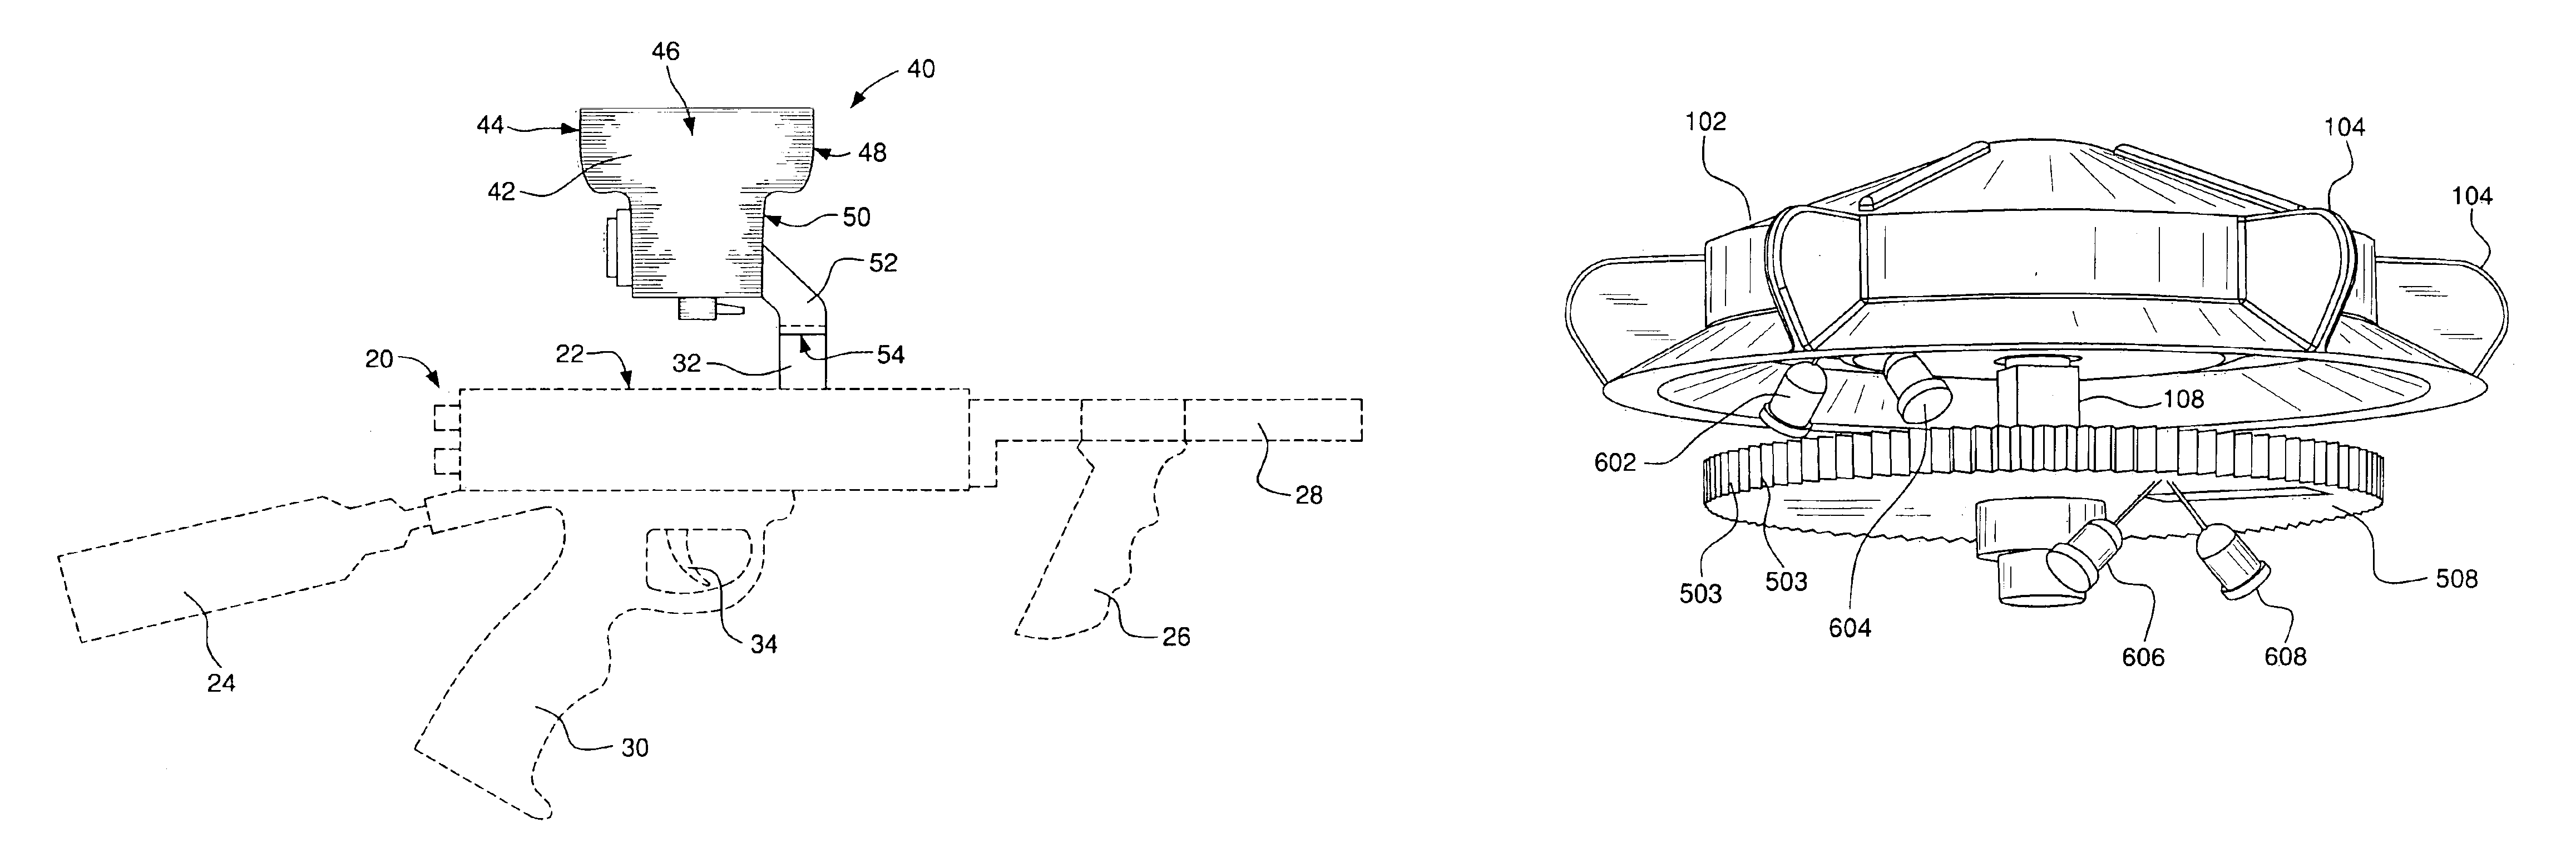 Differential detection system for controlling feed of a paintball loader